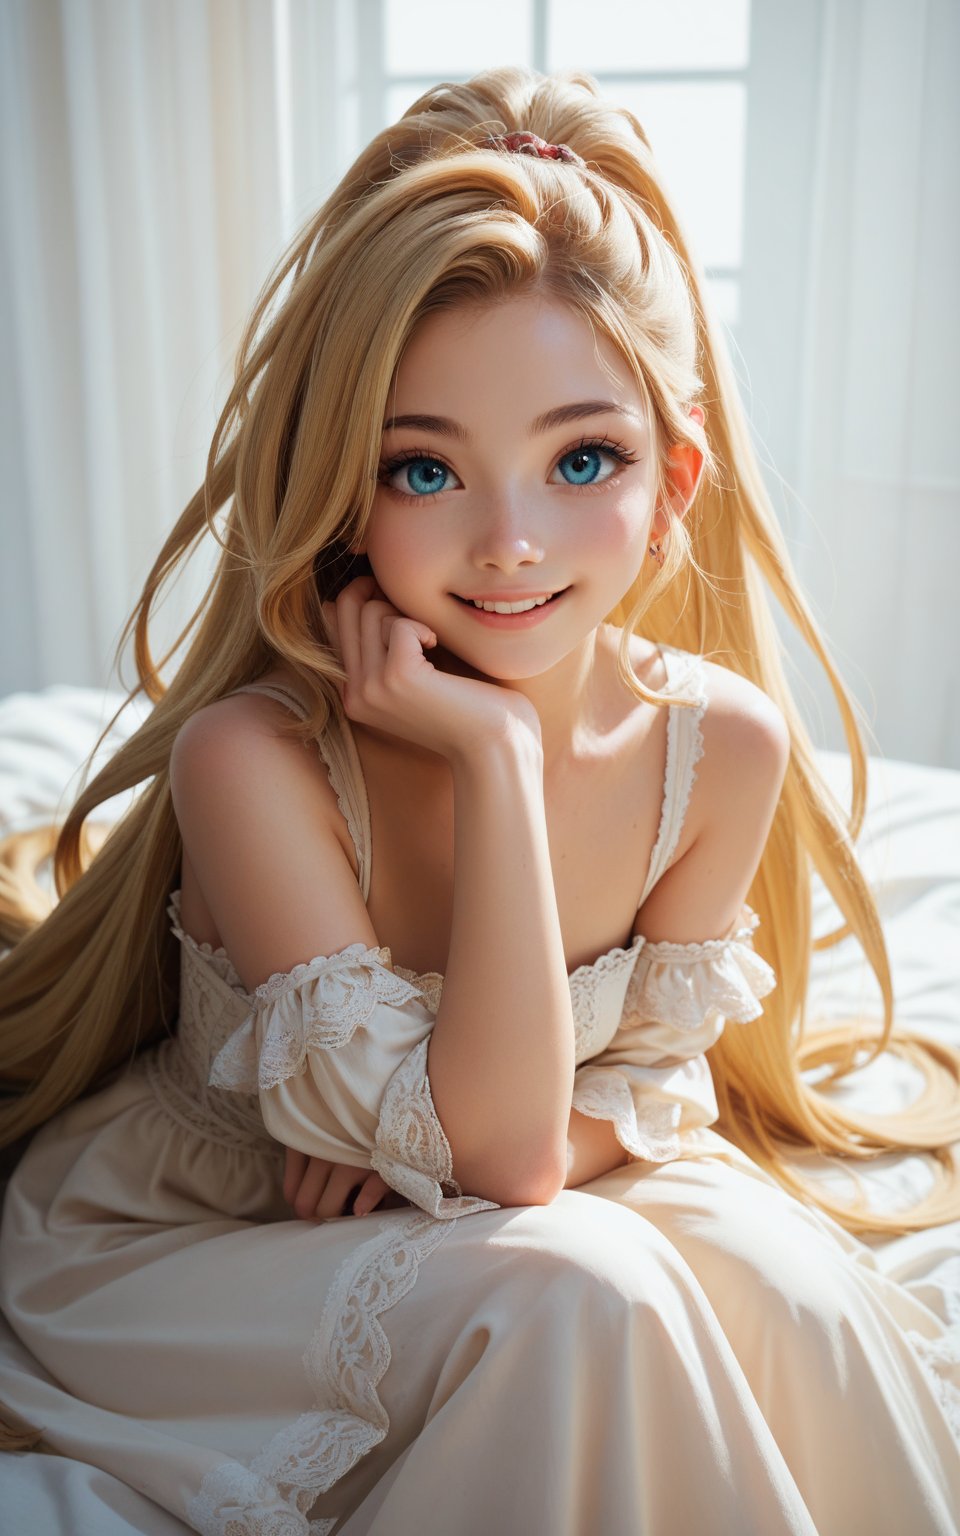 score_9, score_8_up, score_7_up, score_6_up, score_5_up, score_4_up, woman in laced dress, with extremely long ponytail, blonde hair with highlights, very cute face, very detailed big eyes, smile, Expressiveh